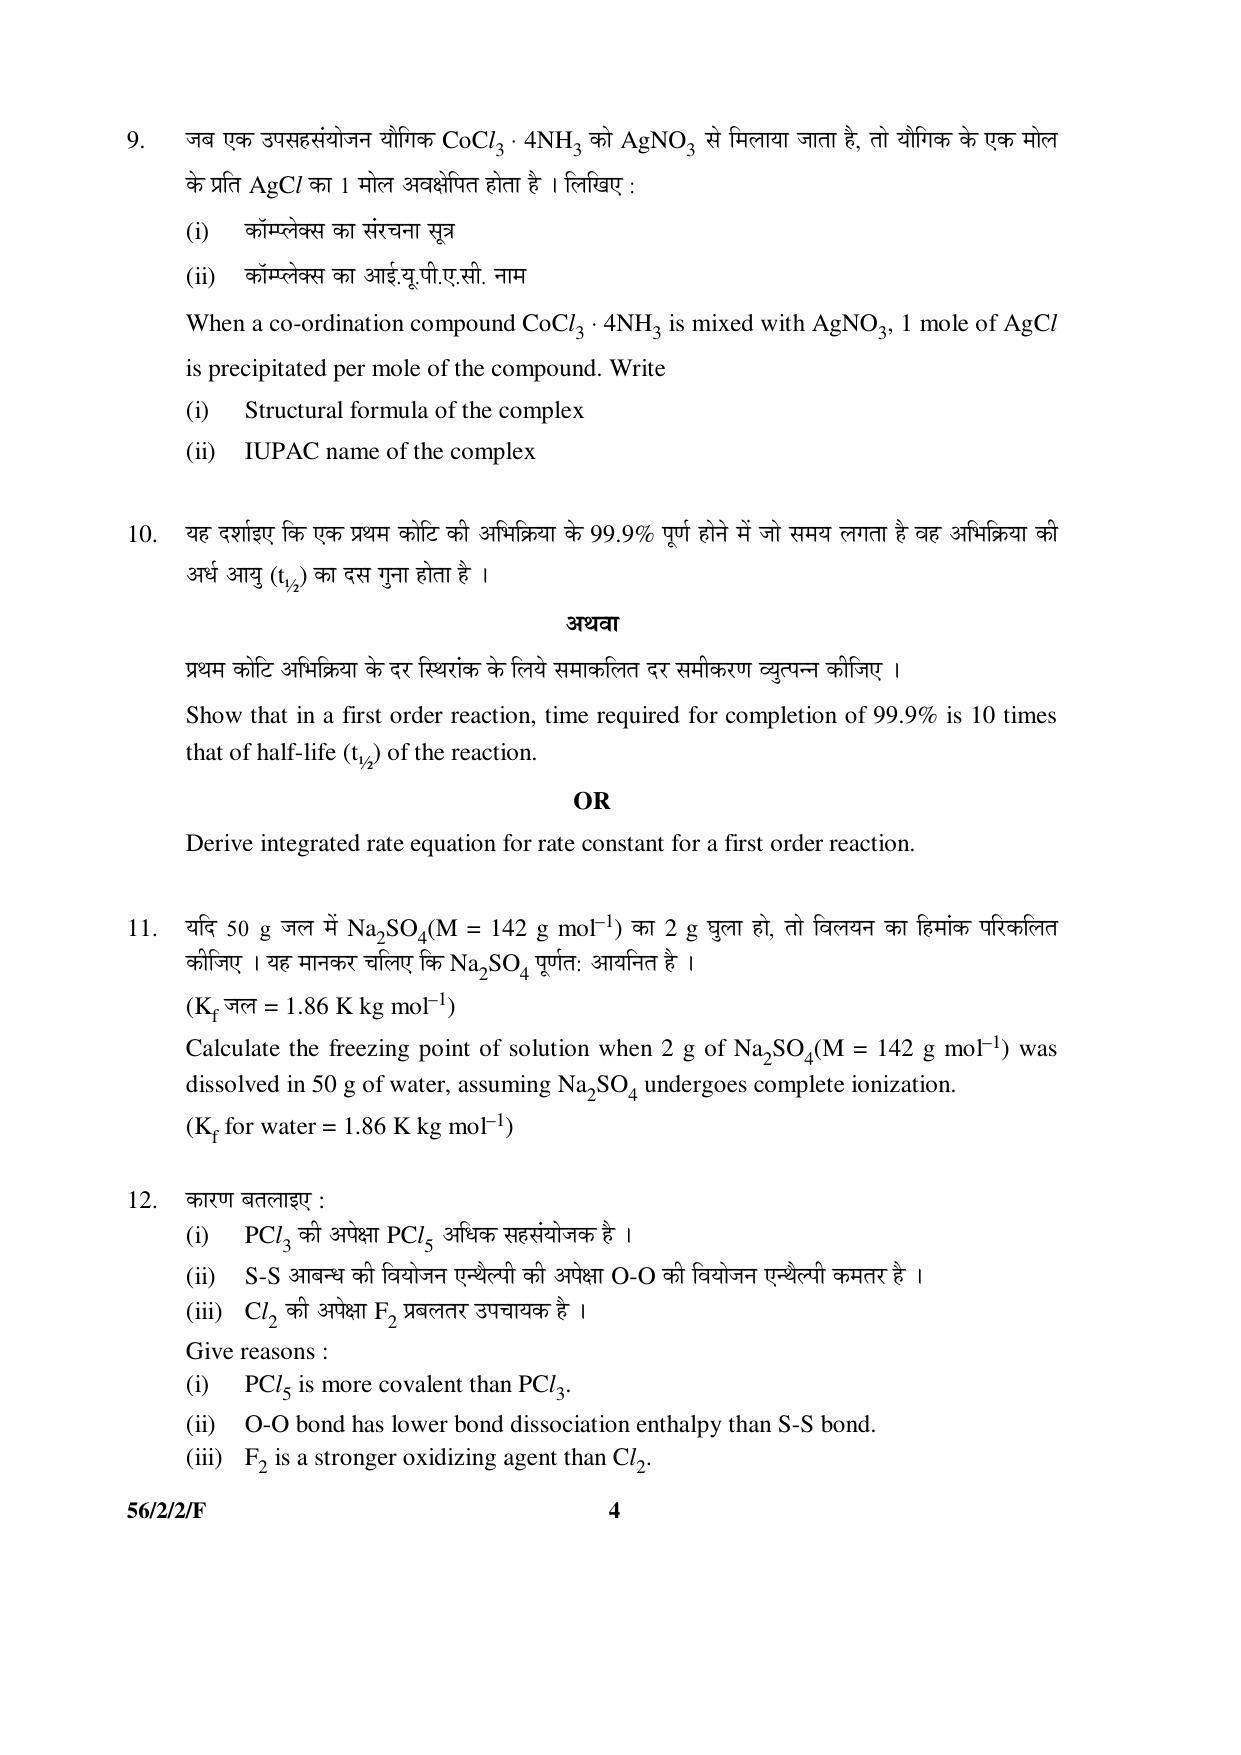 CBSE Class 12 56-2-2-F _Chemistry_ 2016 Question Paper - Page 4